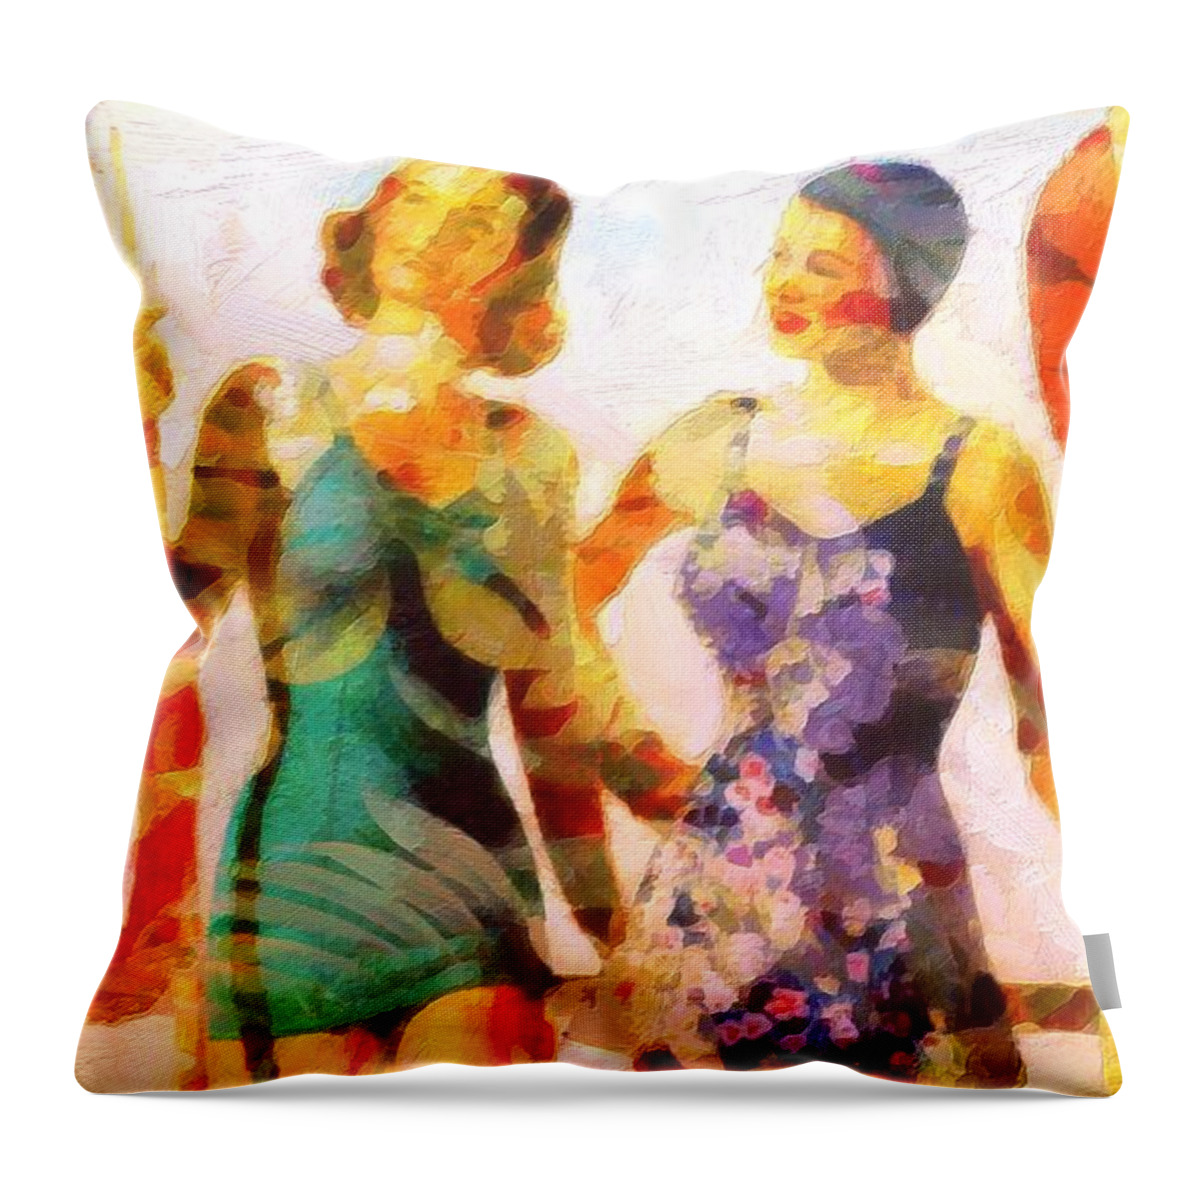 Ladies Throw Pillow featuring the painting At The Beach #1 by Lelia DeMello